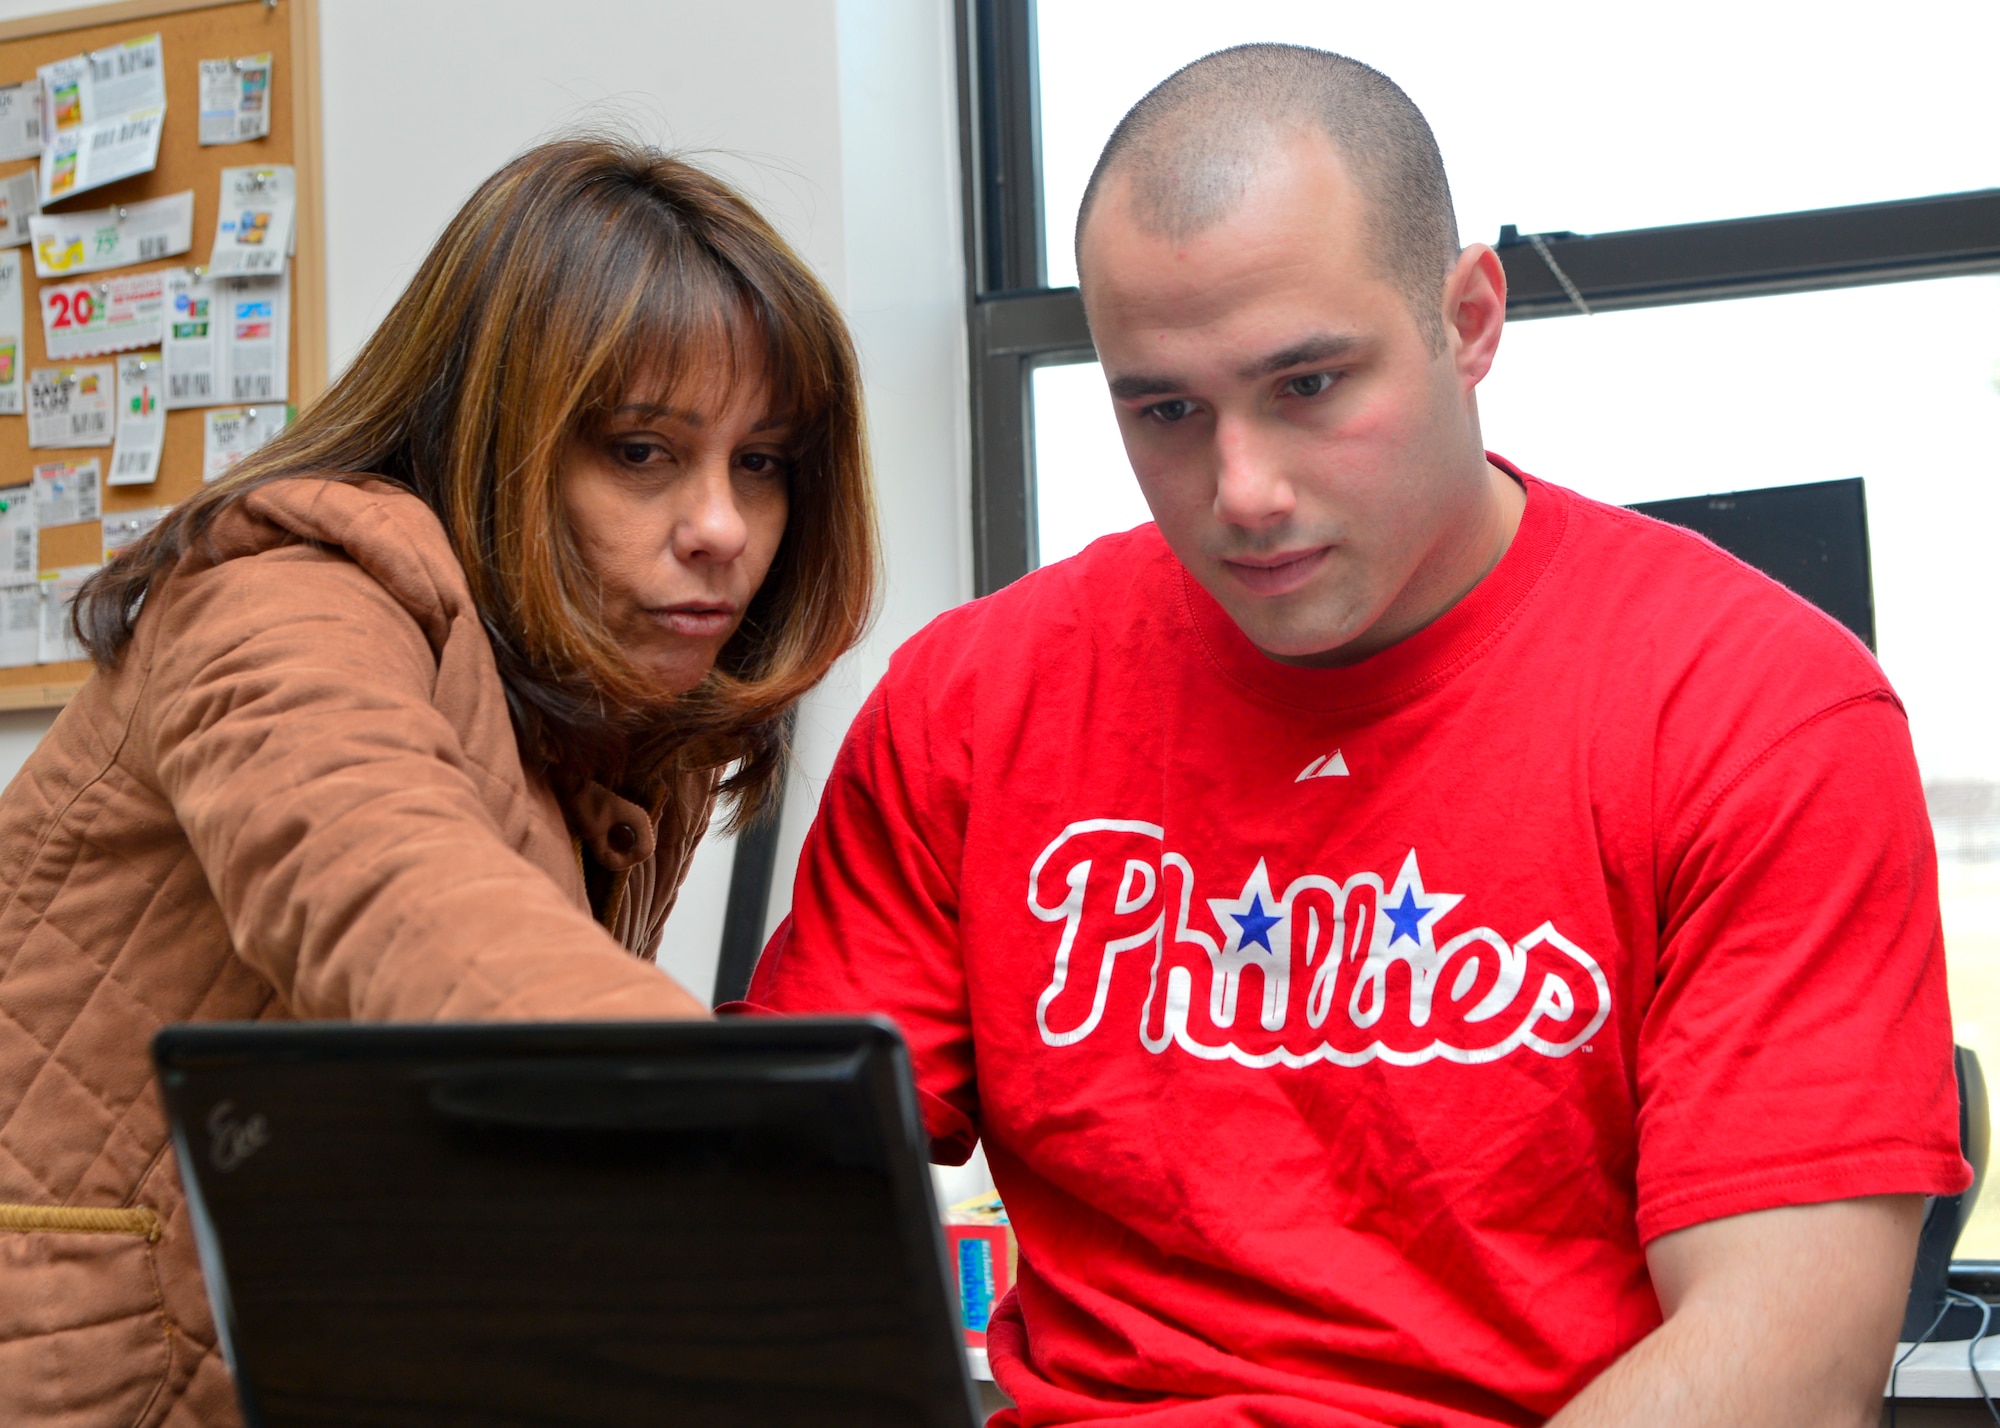 Kathy McNulty, Airman’s Attic volunteer, trains Airman 1st Class Shane Nowrey, 3d Airlift Squadron loadmaster, on data entry logging Jan. 23, 2015, at the Airman’s Attic on Dover Air Force Base, Del. There are 12 shifts a month that Airmen can volunteer for and include work such as signing in customers, inspecting, sorting and displaying donated items and rearranging and loading furniture. (U.S. Air Force photo/Airman 1st Class William Johnson)